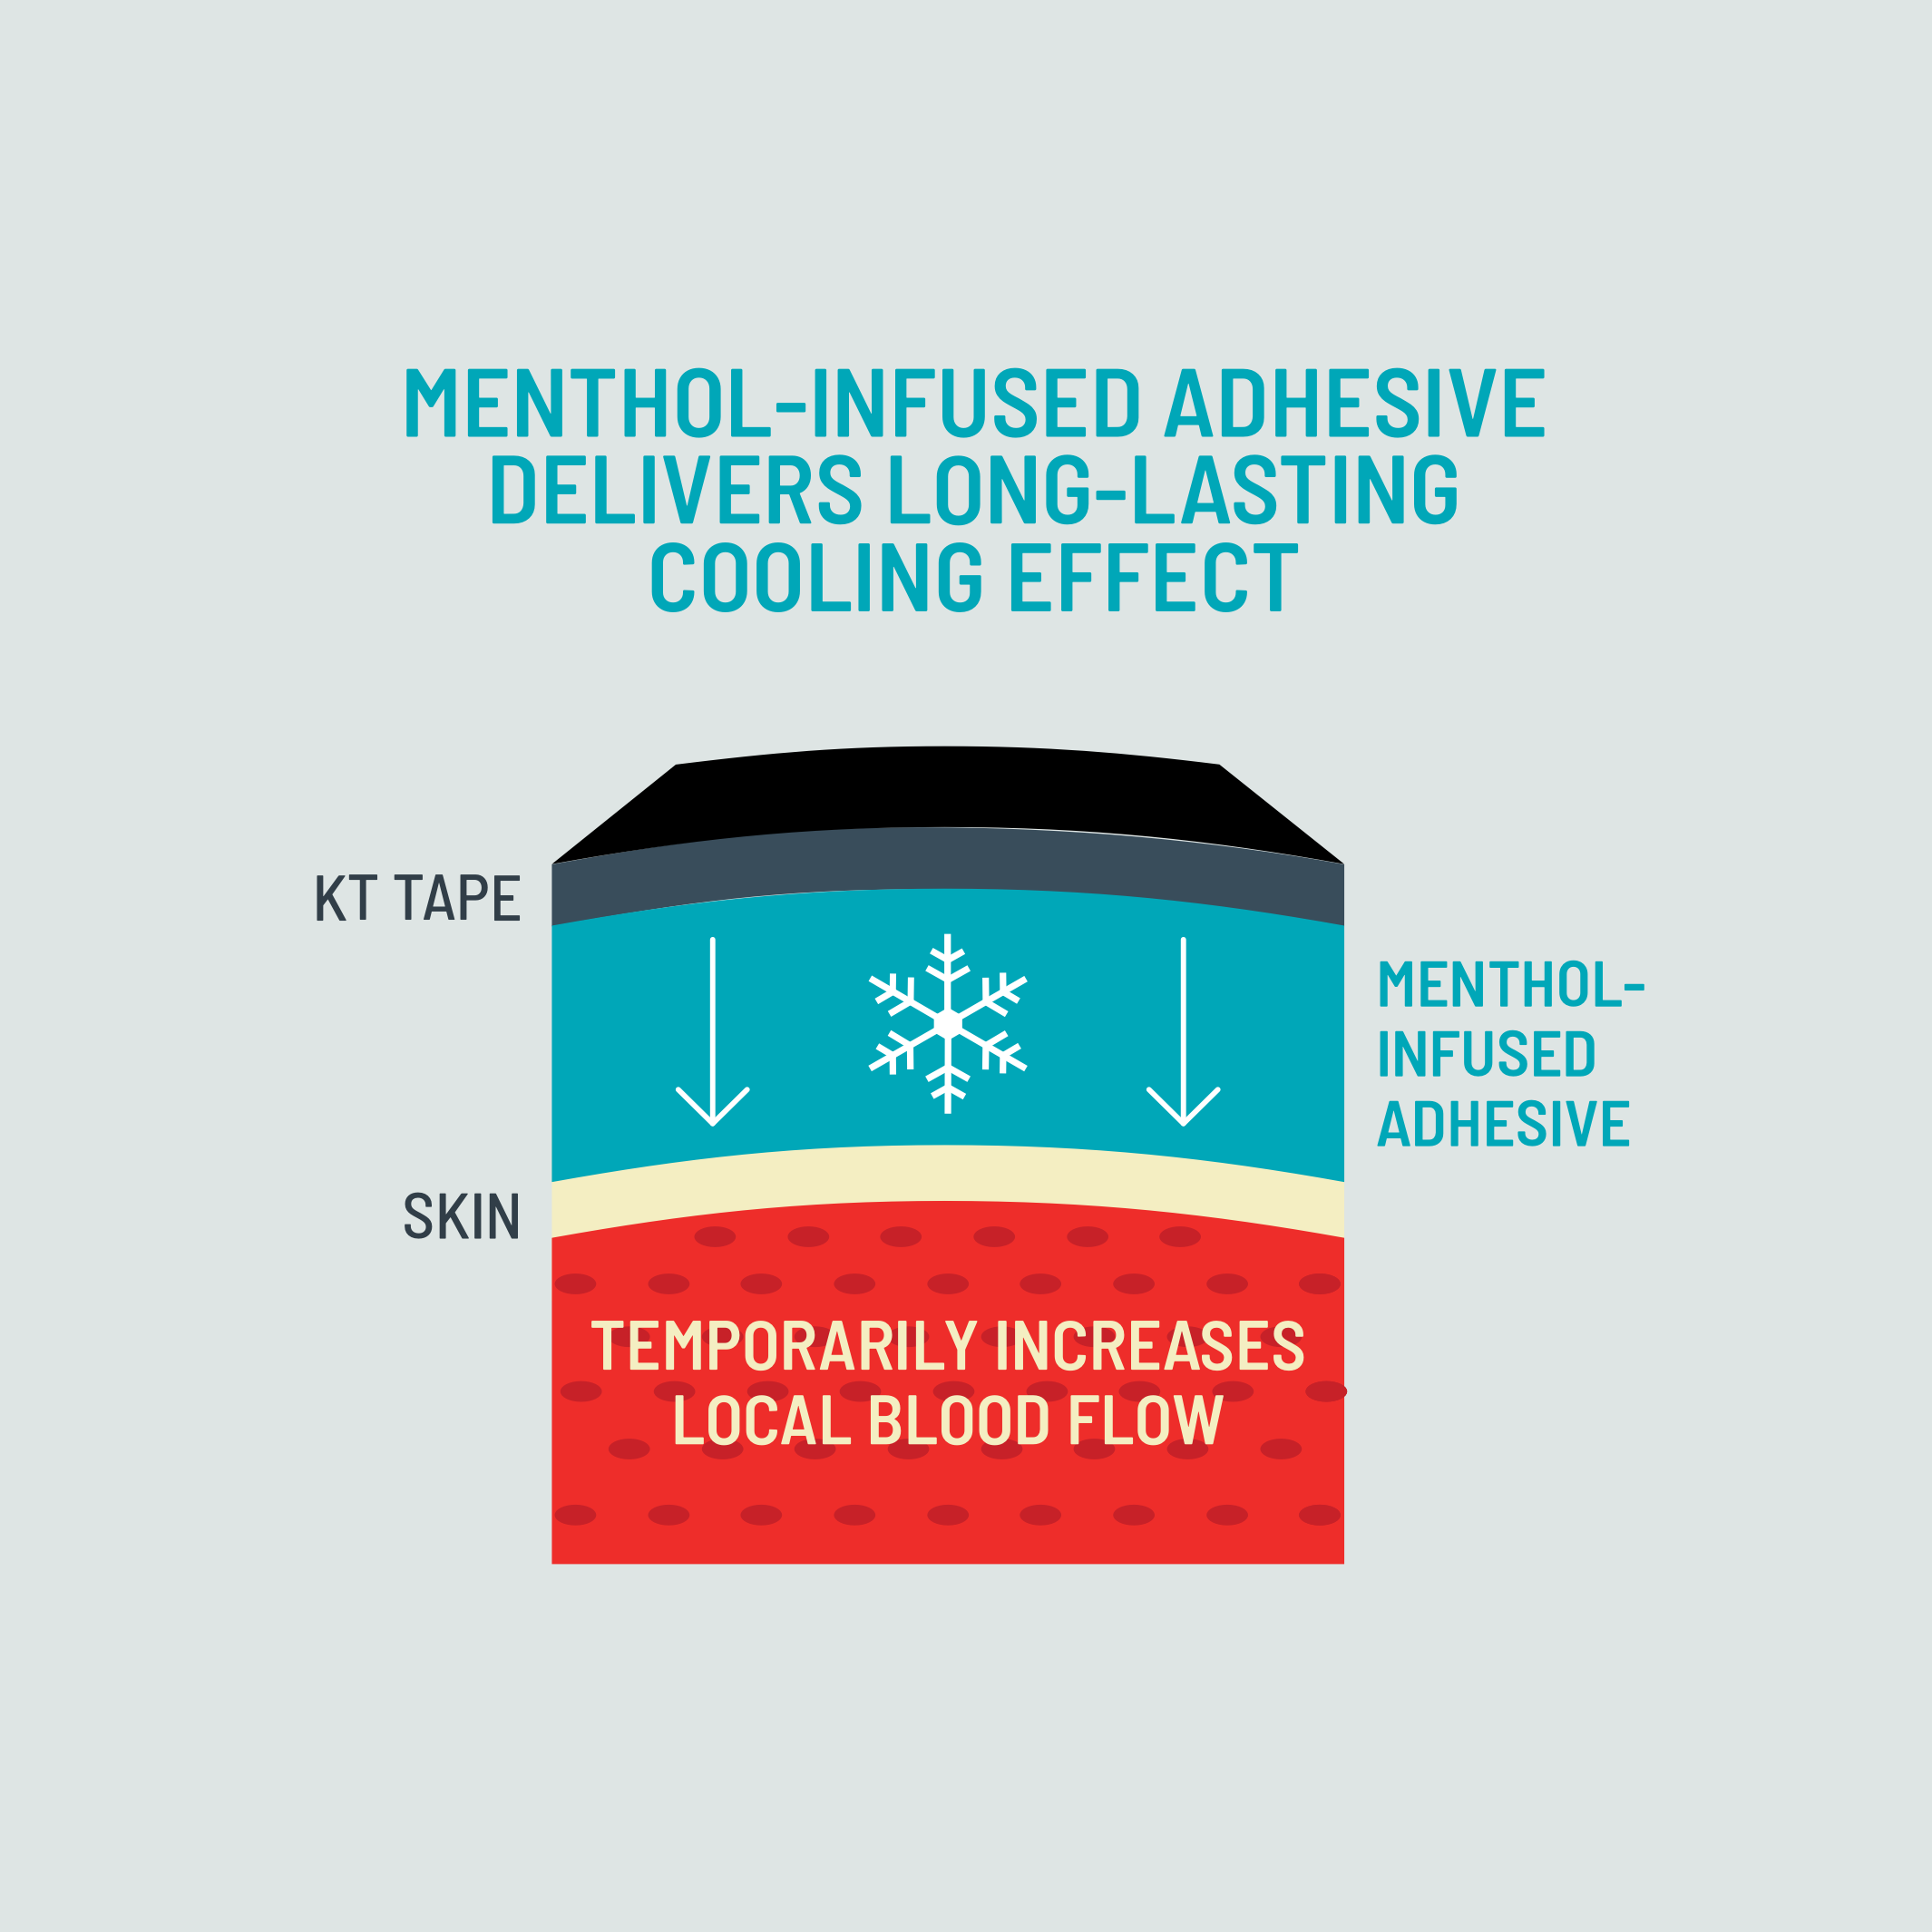 Menthol-infused adhesive delivers long-lasting cooling effect